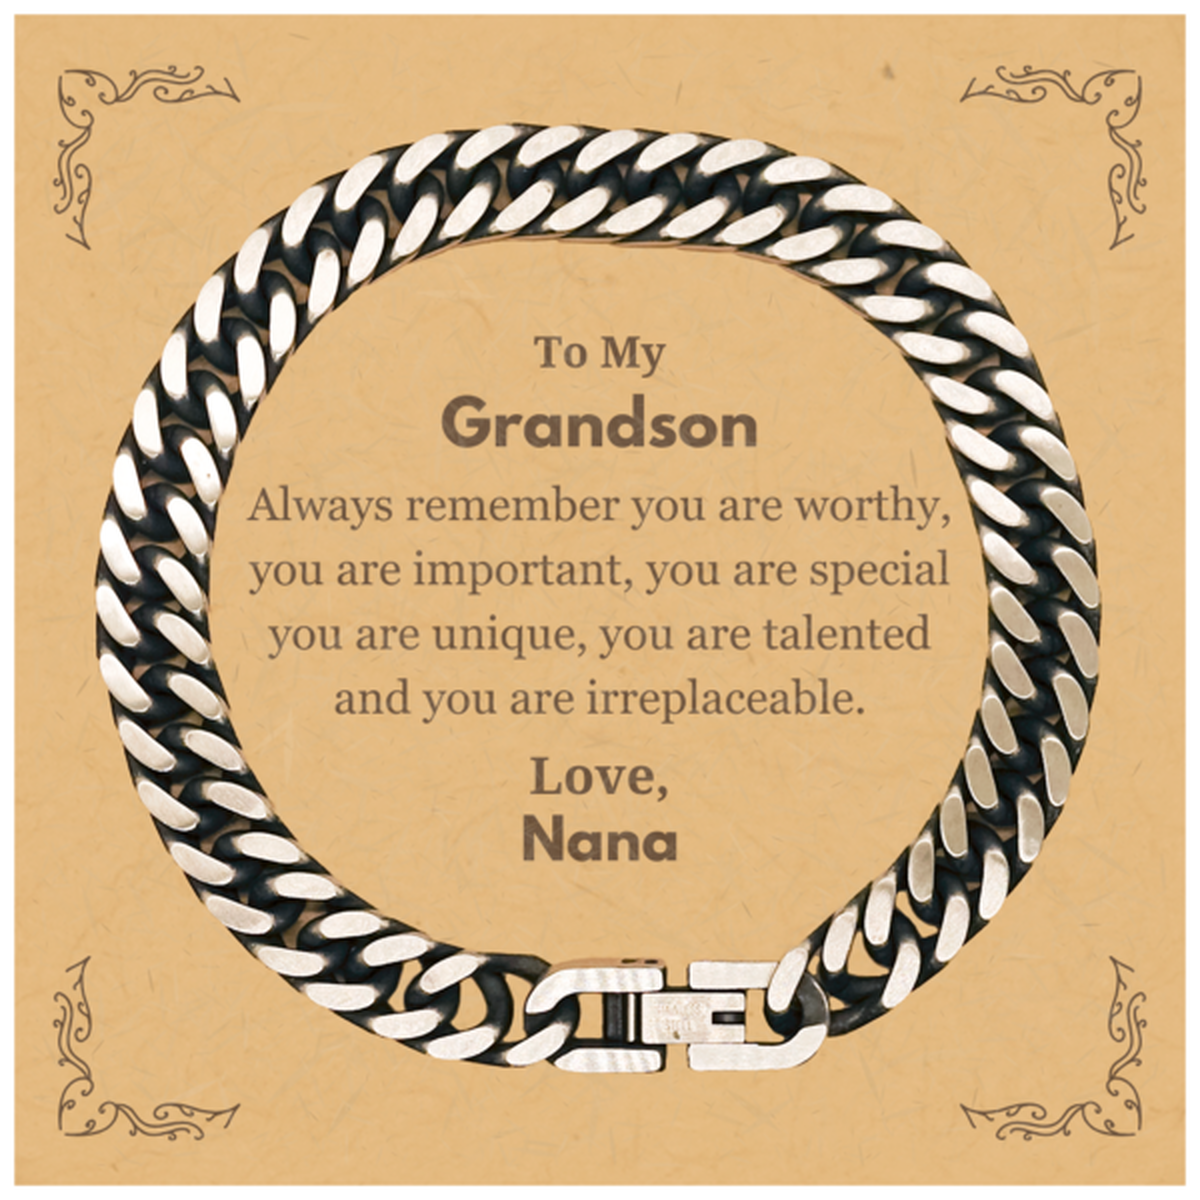 Grandson Birthday Gifts from Nana, Inspirational Cuban Link Chain Bracelet for Grandson Christmas Graduation Gifts for Grandson Always remember you are worthy, you are important. Love, Nana